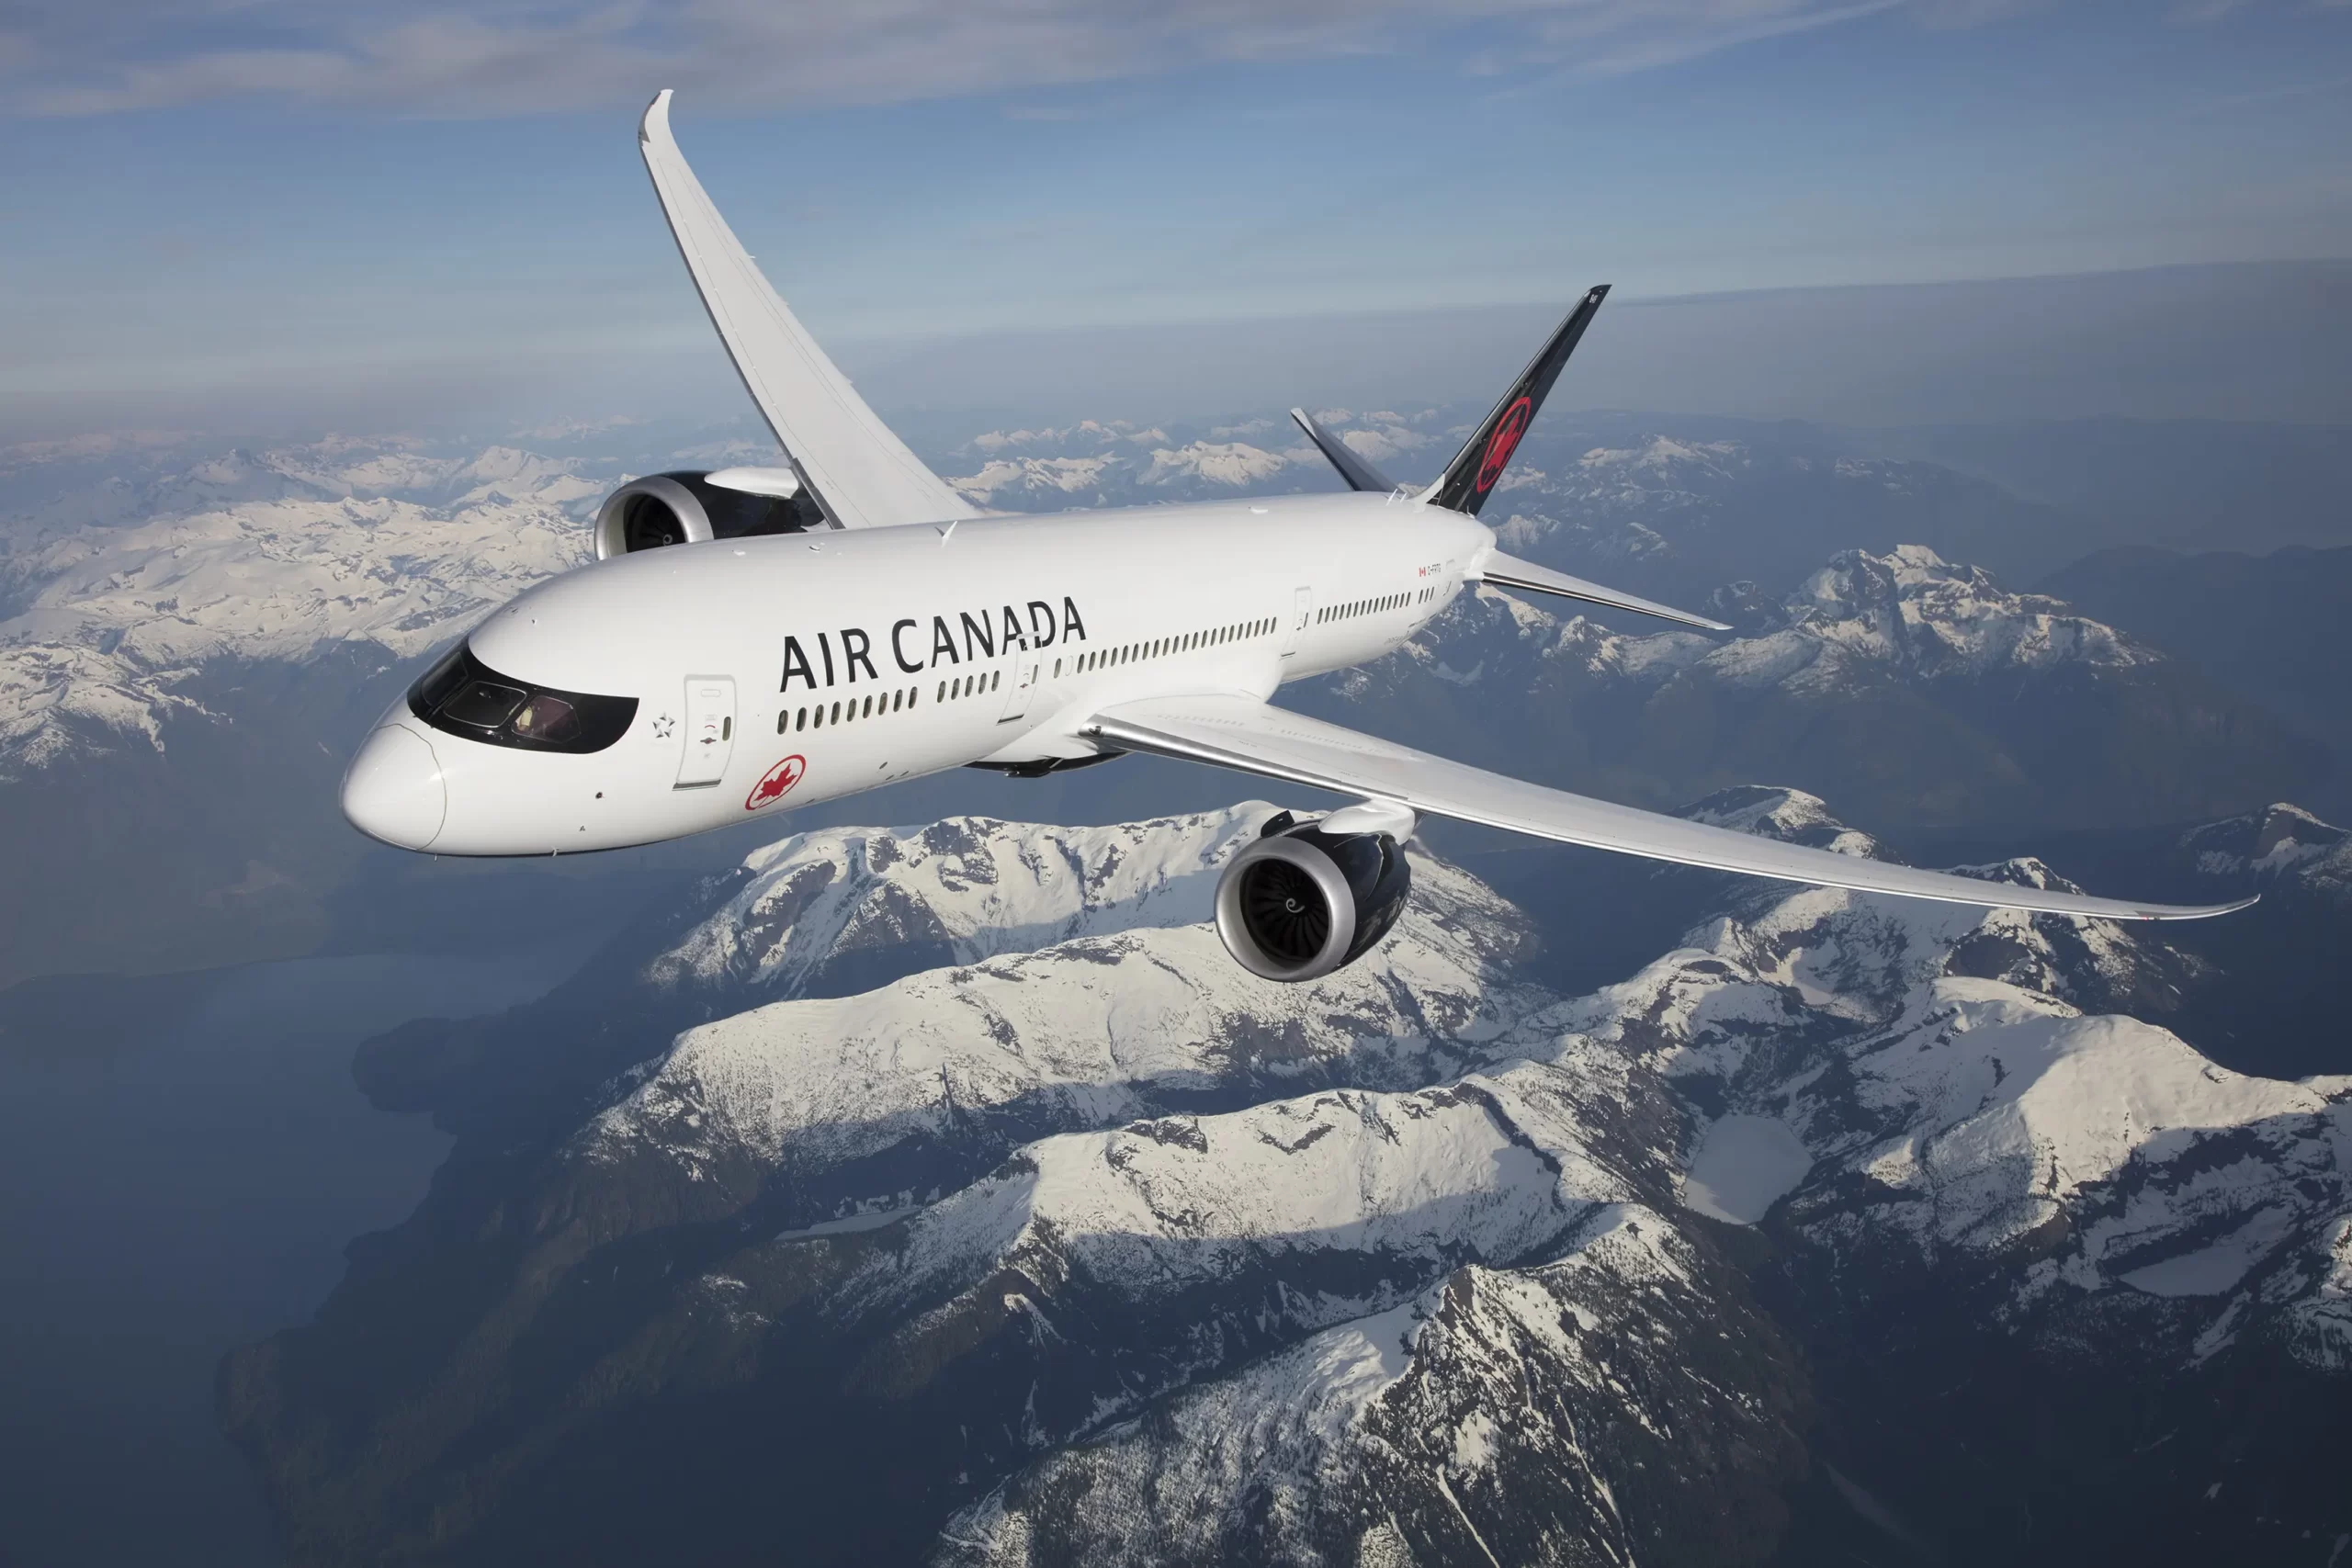 fly on Air Canada's 787 when you use velocity points on Air Canada